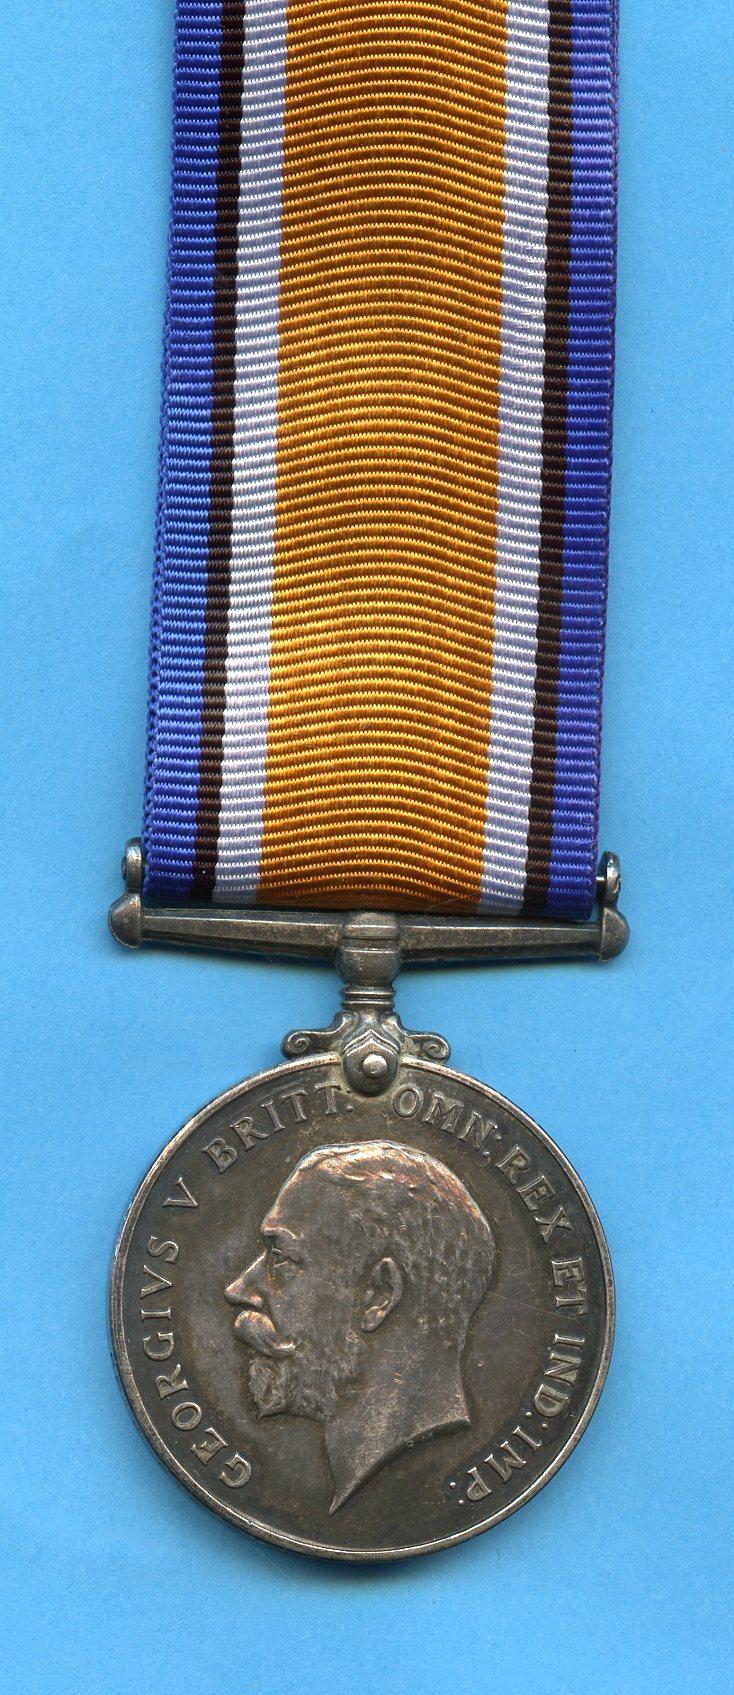 British War Medal 1914-18  To Pte Charles Thomas Graco, 8th (Post Office Rifles) Battalion, London Regiment